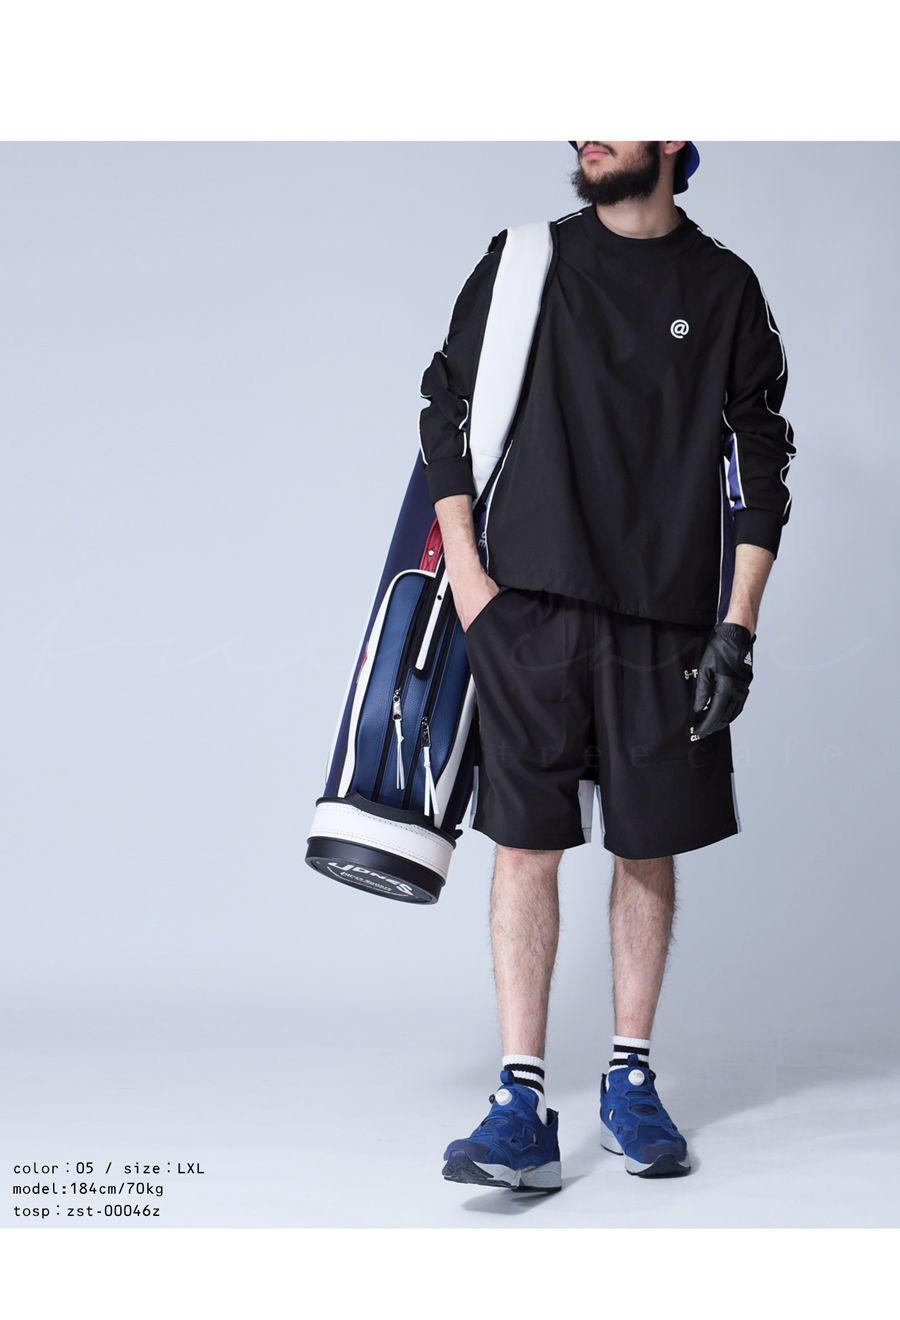 ANTIQUA GOLF×STCH shorts lady's free shipping *4 month 19 day 10 hour ~ sale. black is soon sale expectation!100pt mail service possible Mother's Day 